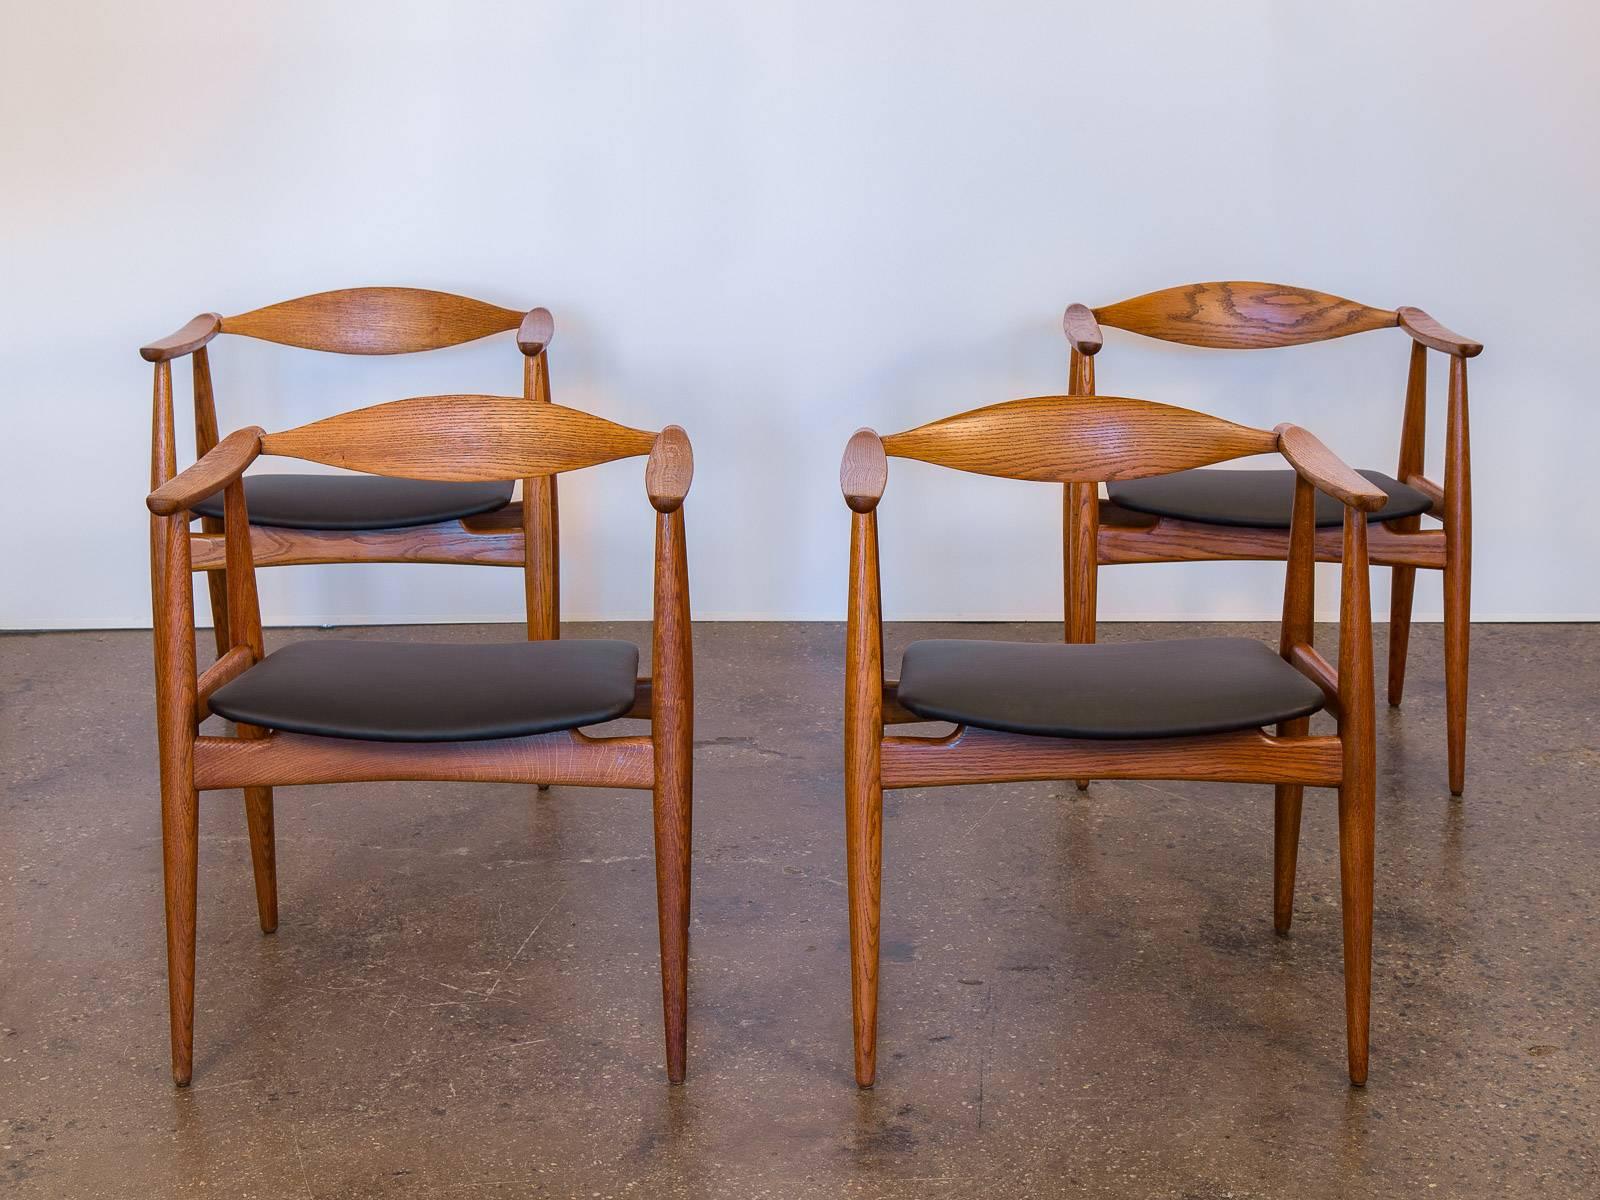 Scarce set of four CH-35 Wegner Chairs for Carl Hansen & Son. Original owner purchased these out-of-production chairs in the 1960s. All chairs are marked on the underside and in impeccable condition. Armchairs are fully restored; the floating seats